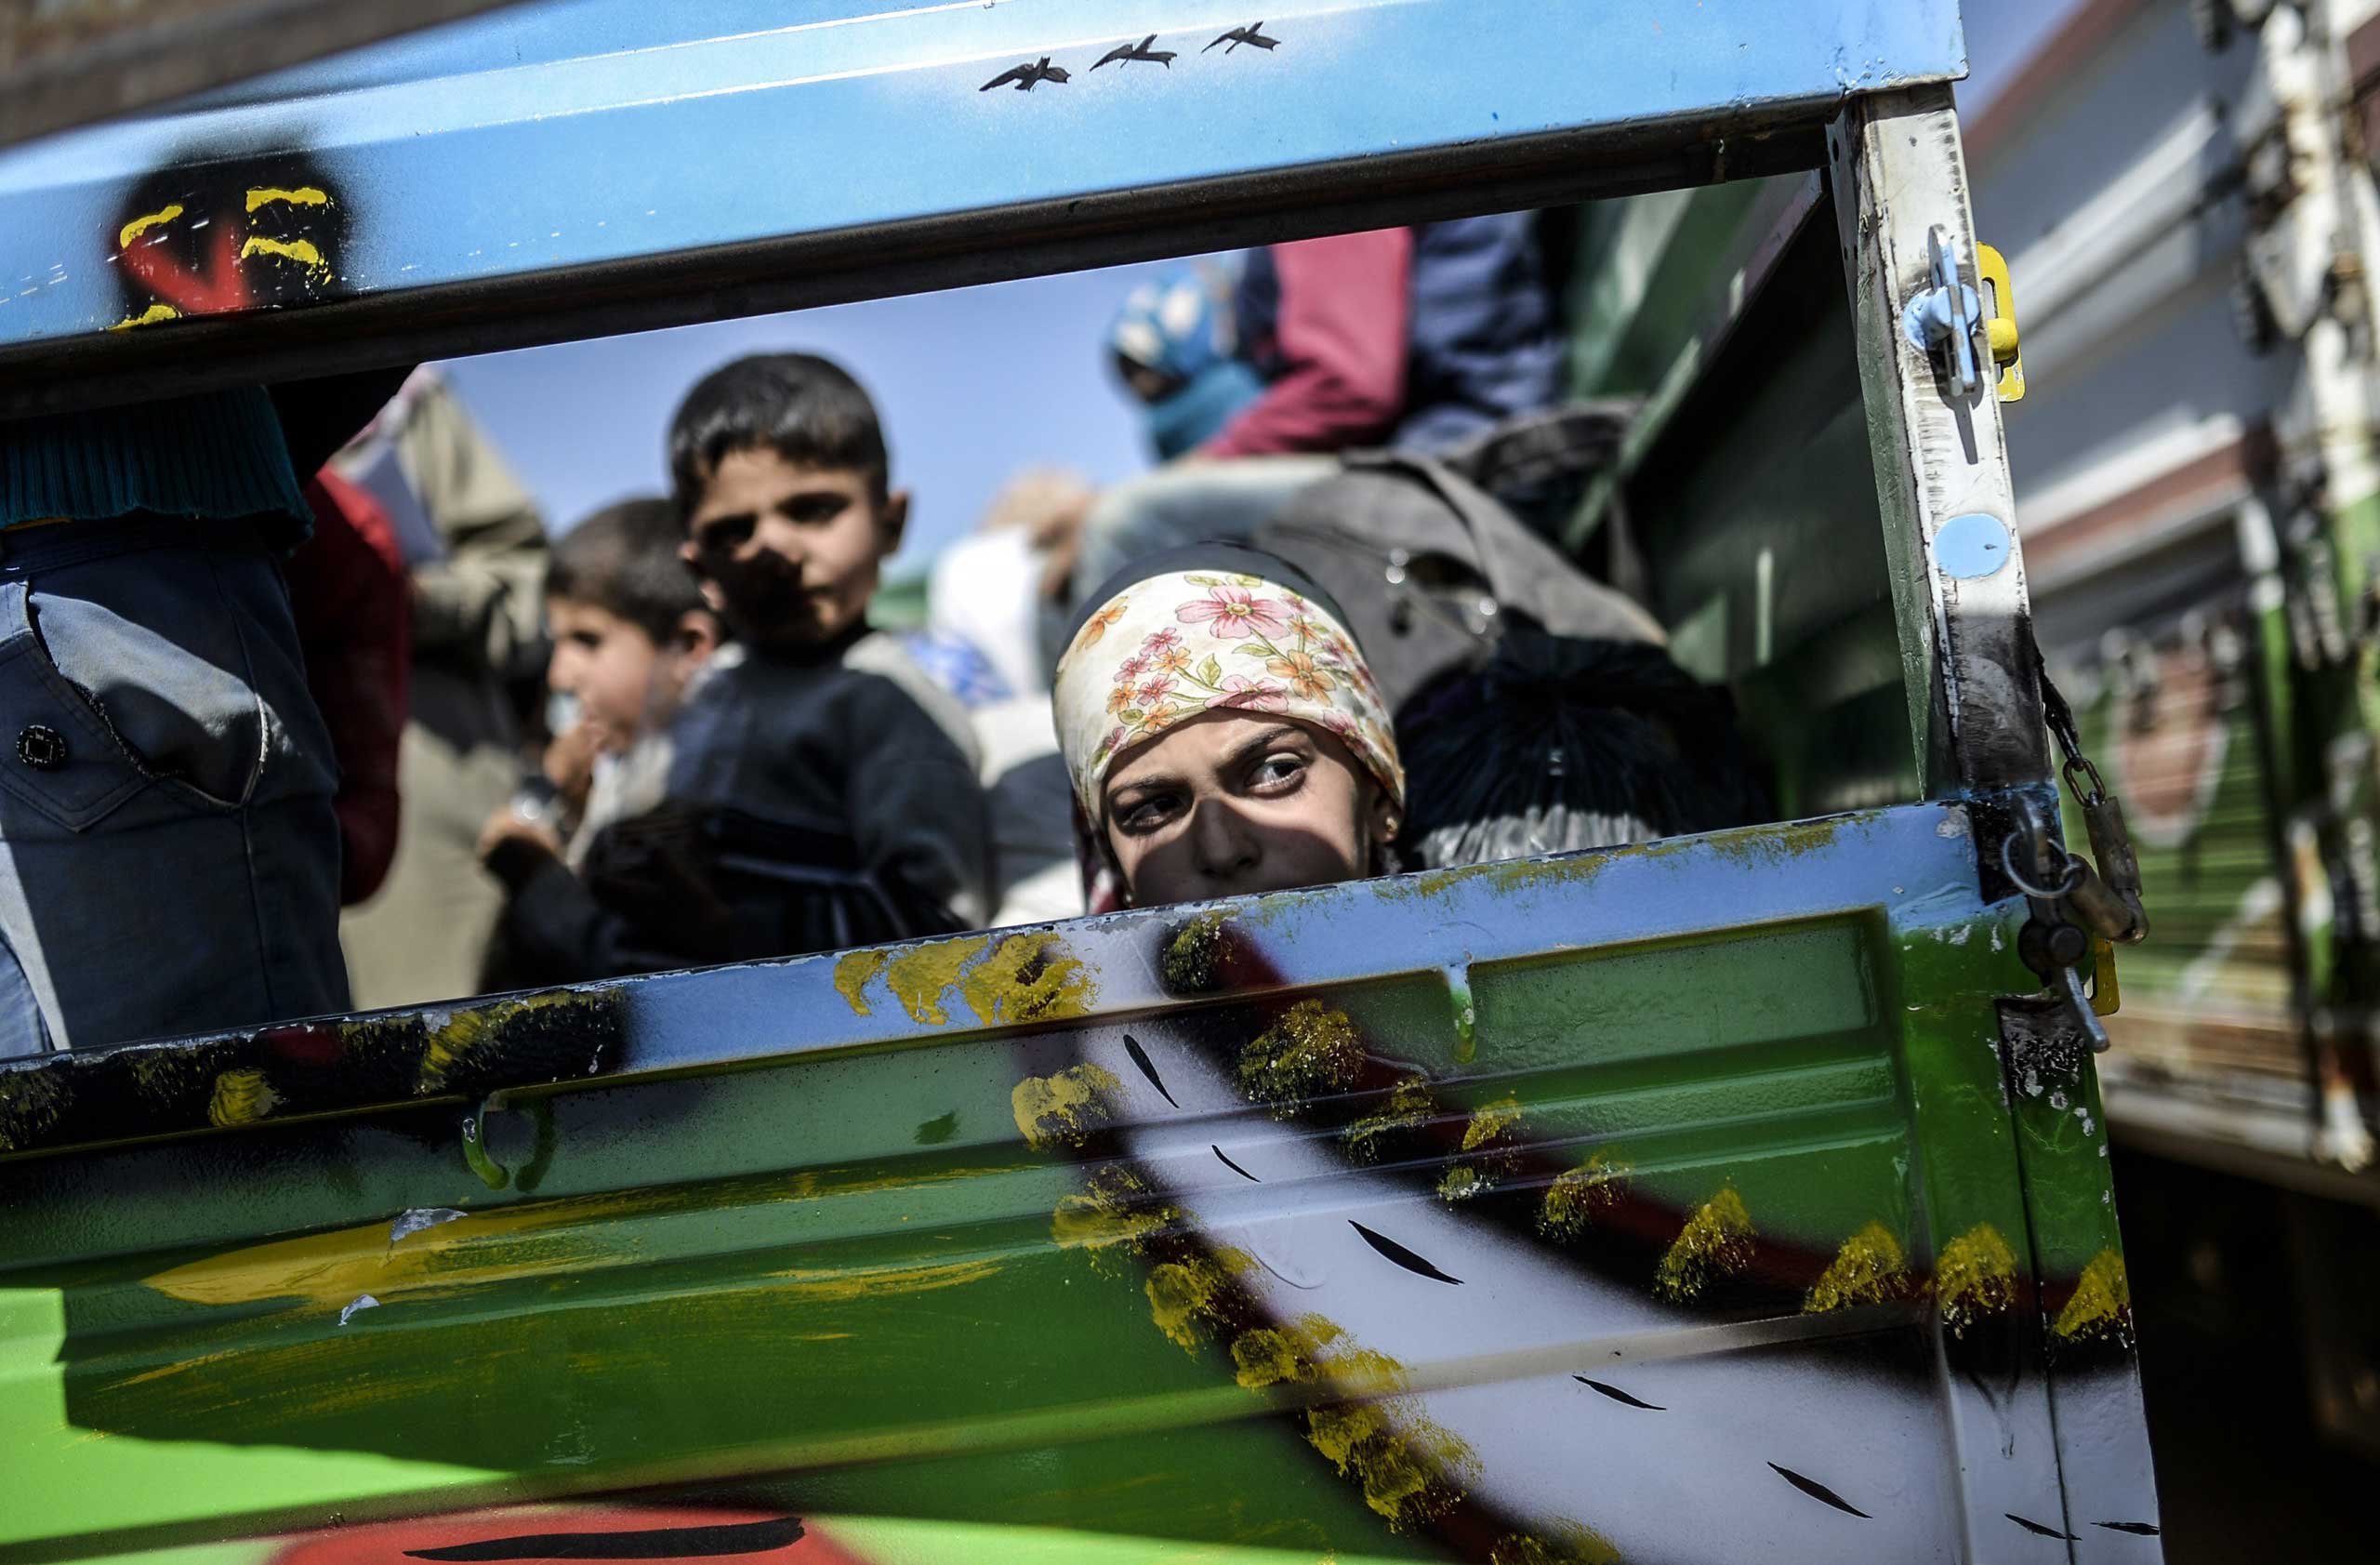 Syrian Kurds sit in a truck after crossing the Syrian-Turkish border at the southeastern town of Suruc in Sanliurfa province on Sept. 23, 2014.